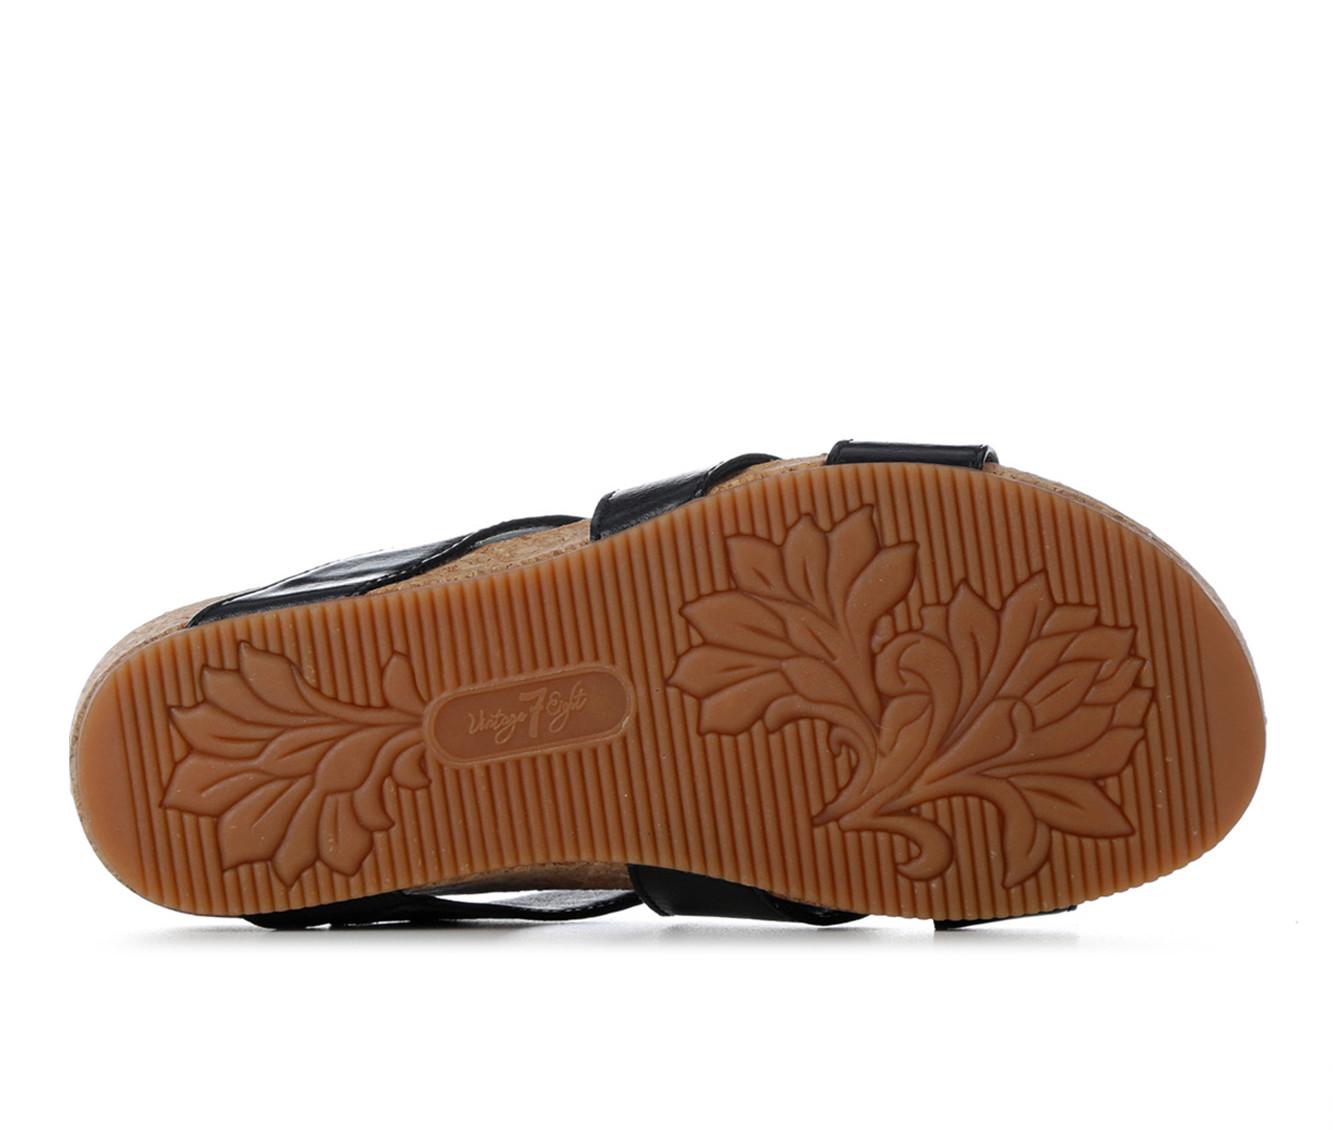 Women's Vintage 7 Eight Ainsley Footbed Sandals